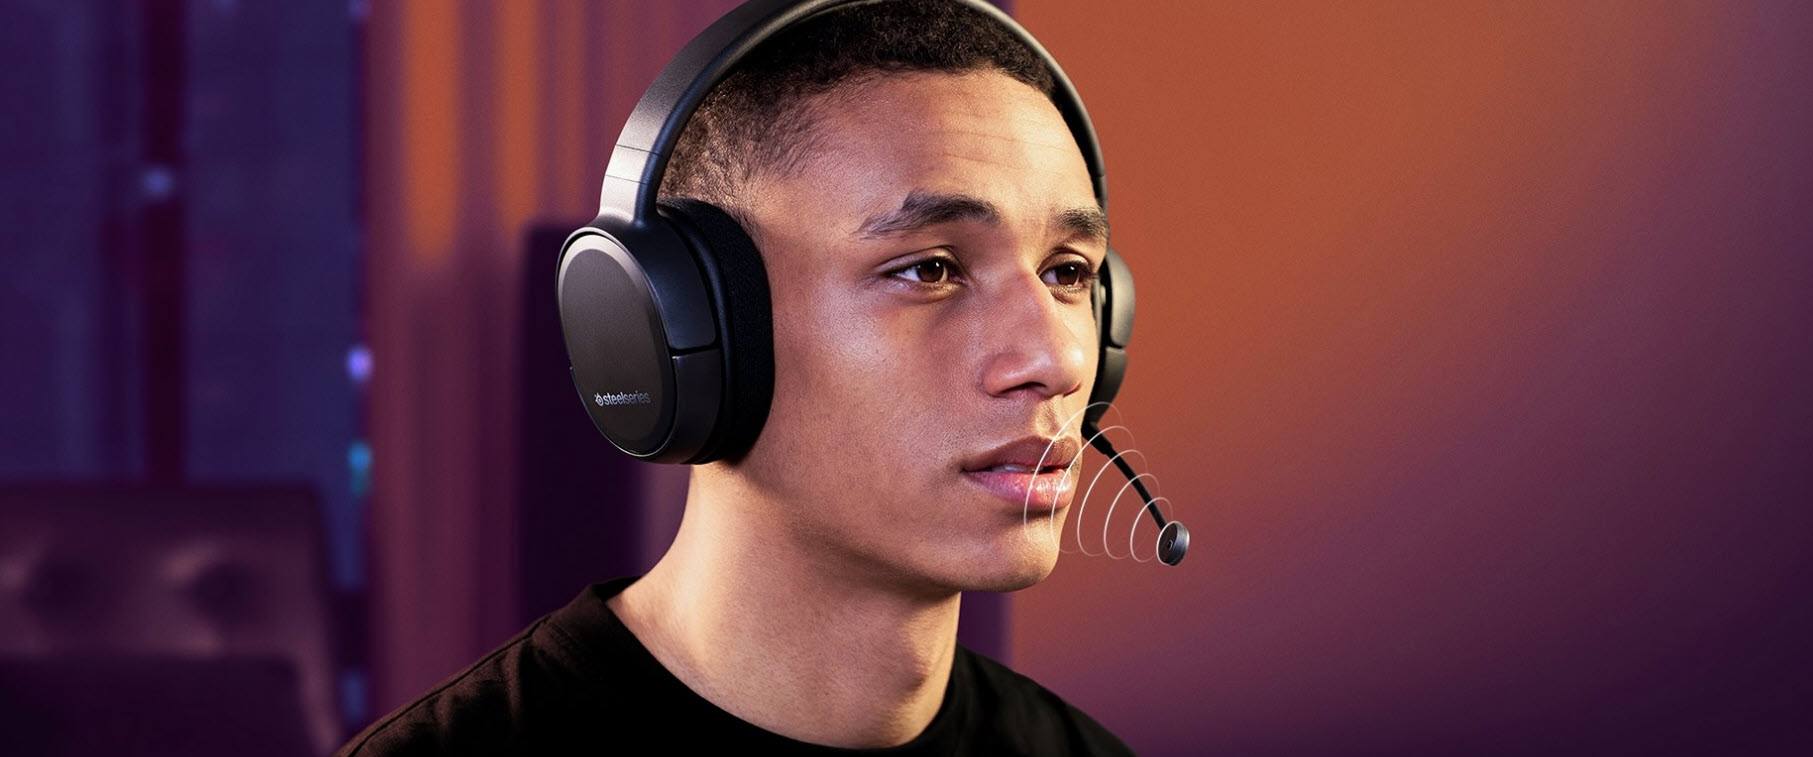 steelseries-headset-issues-troubleshooting-and-fixes